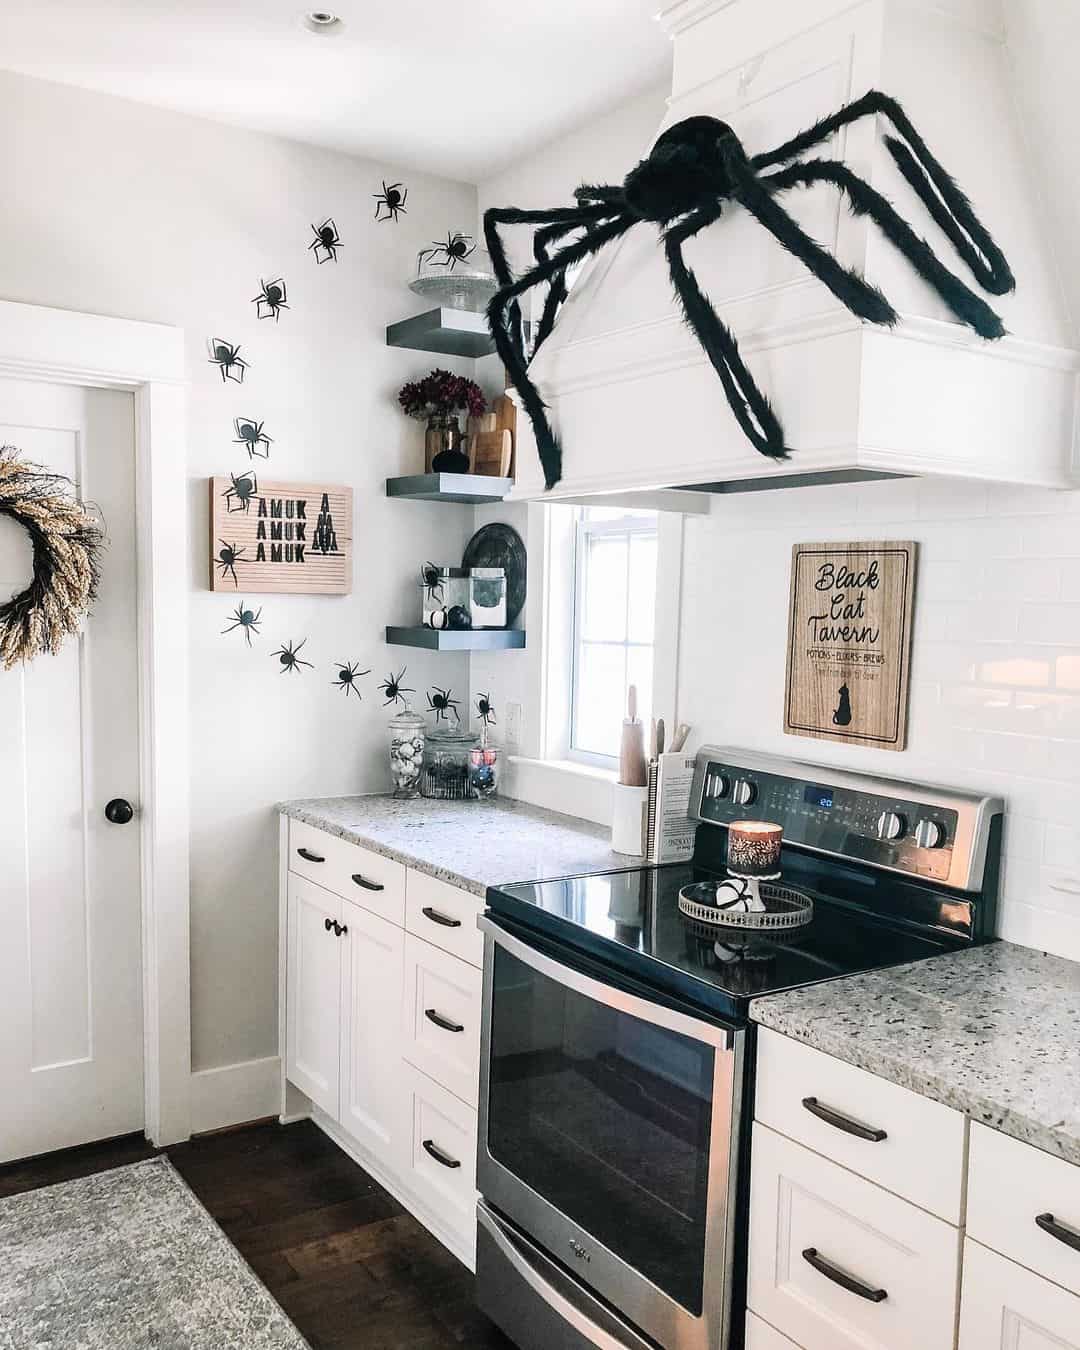 Arachnid Accents in a Stylish Culinary Space